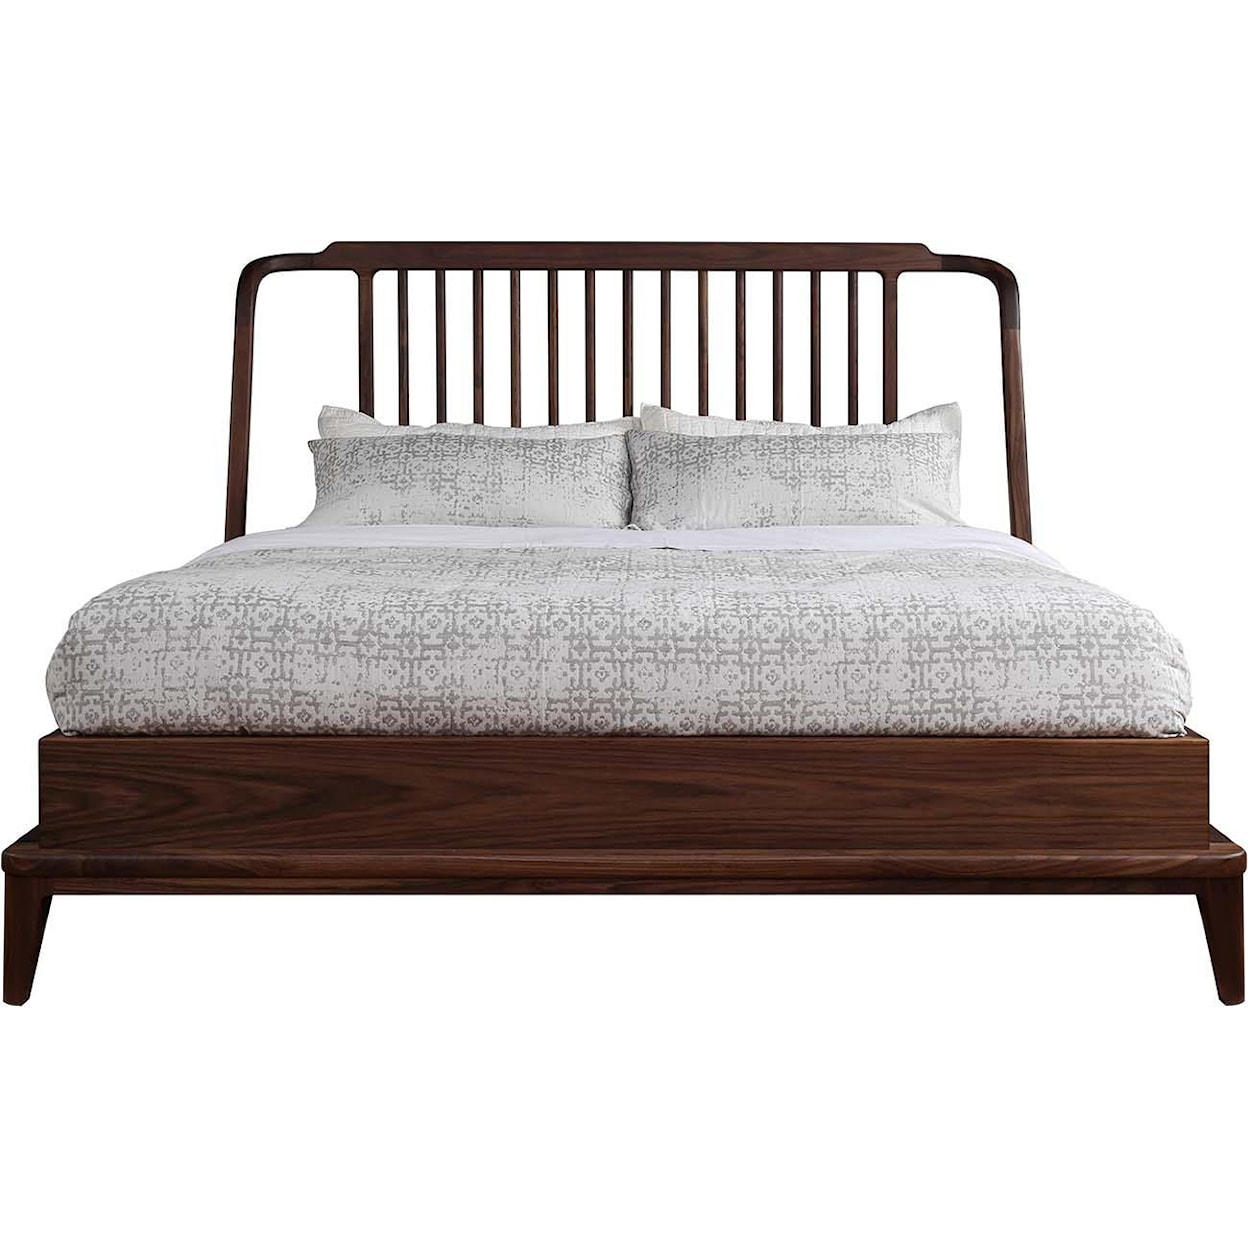 Stickley Walnut Grove California King Spindle Bed